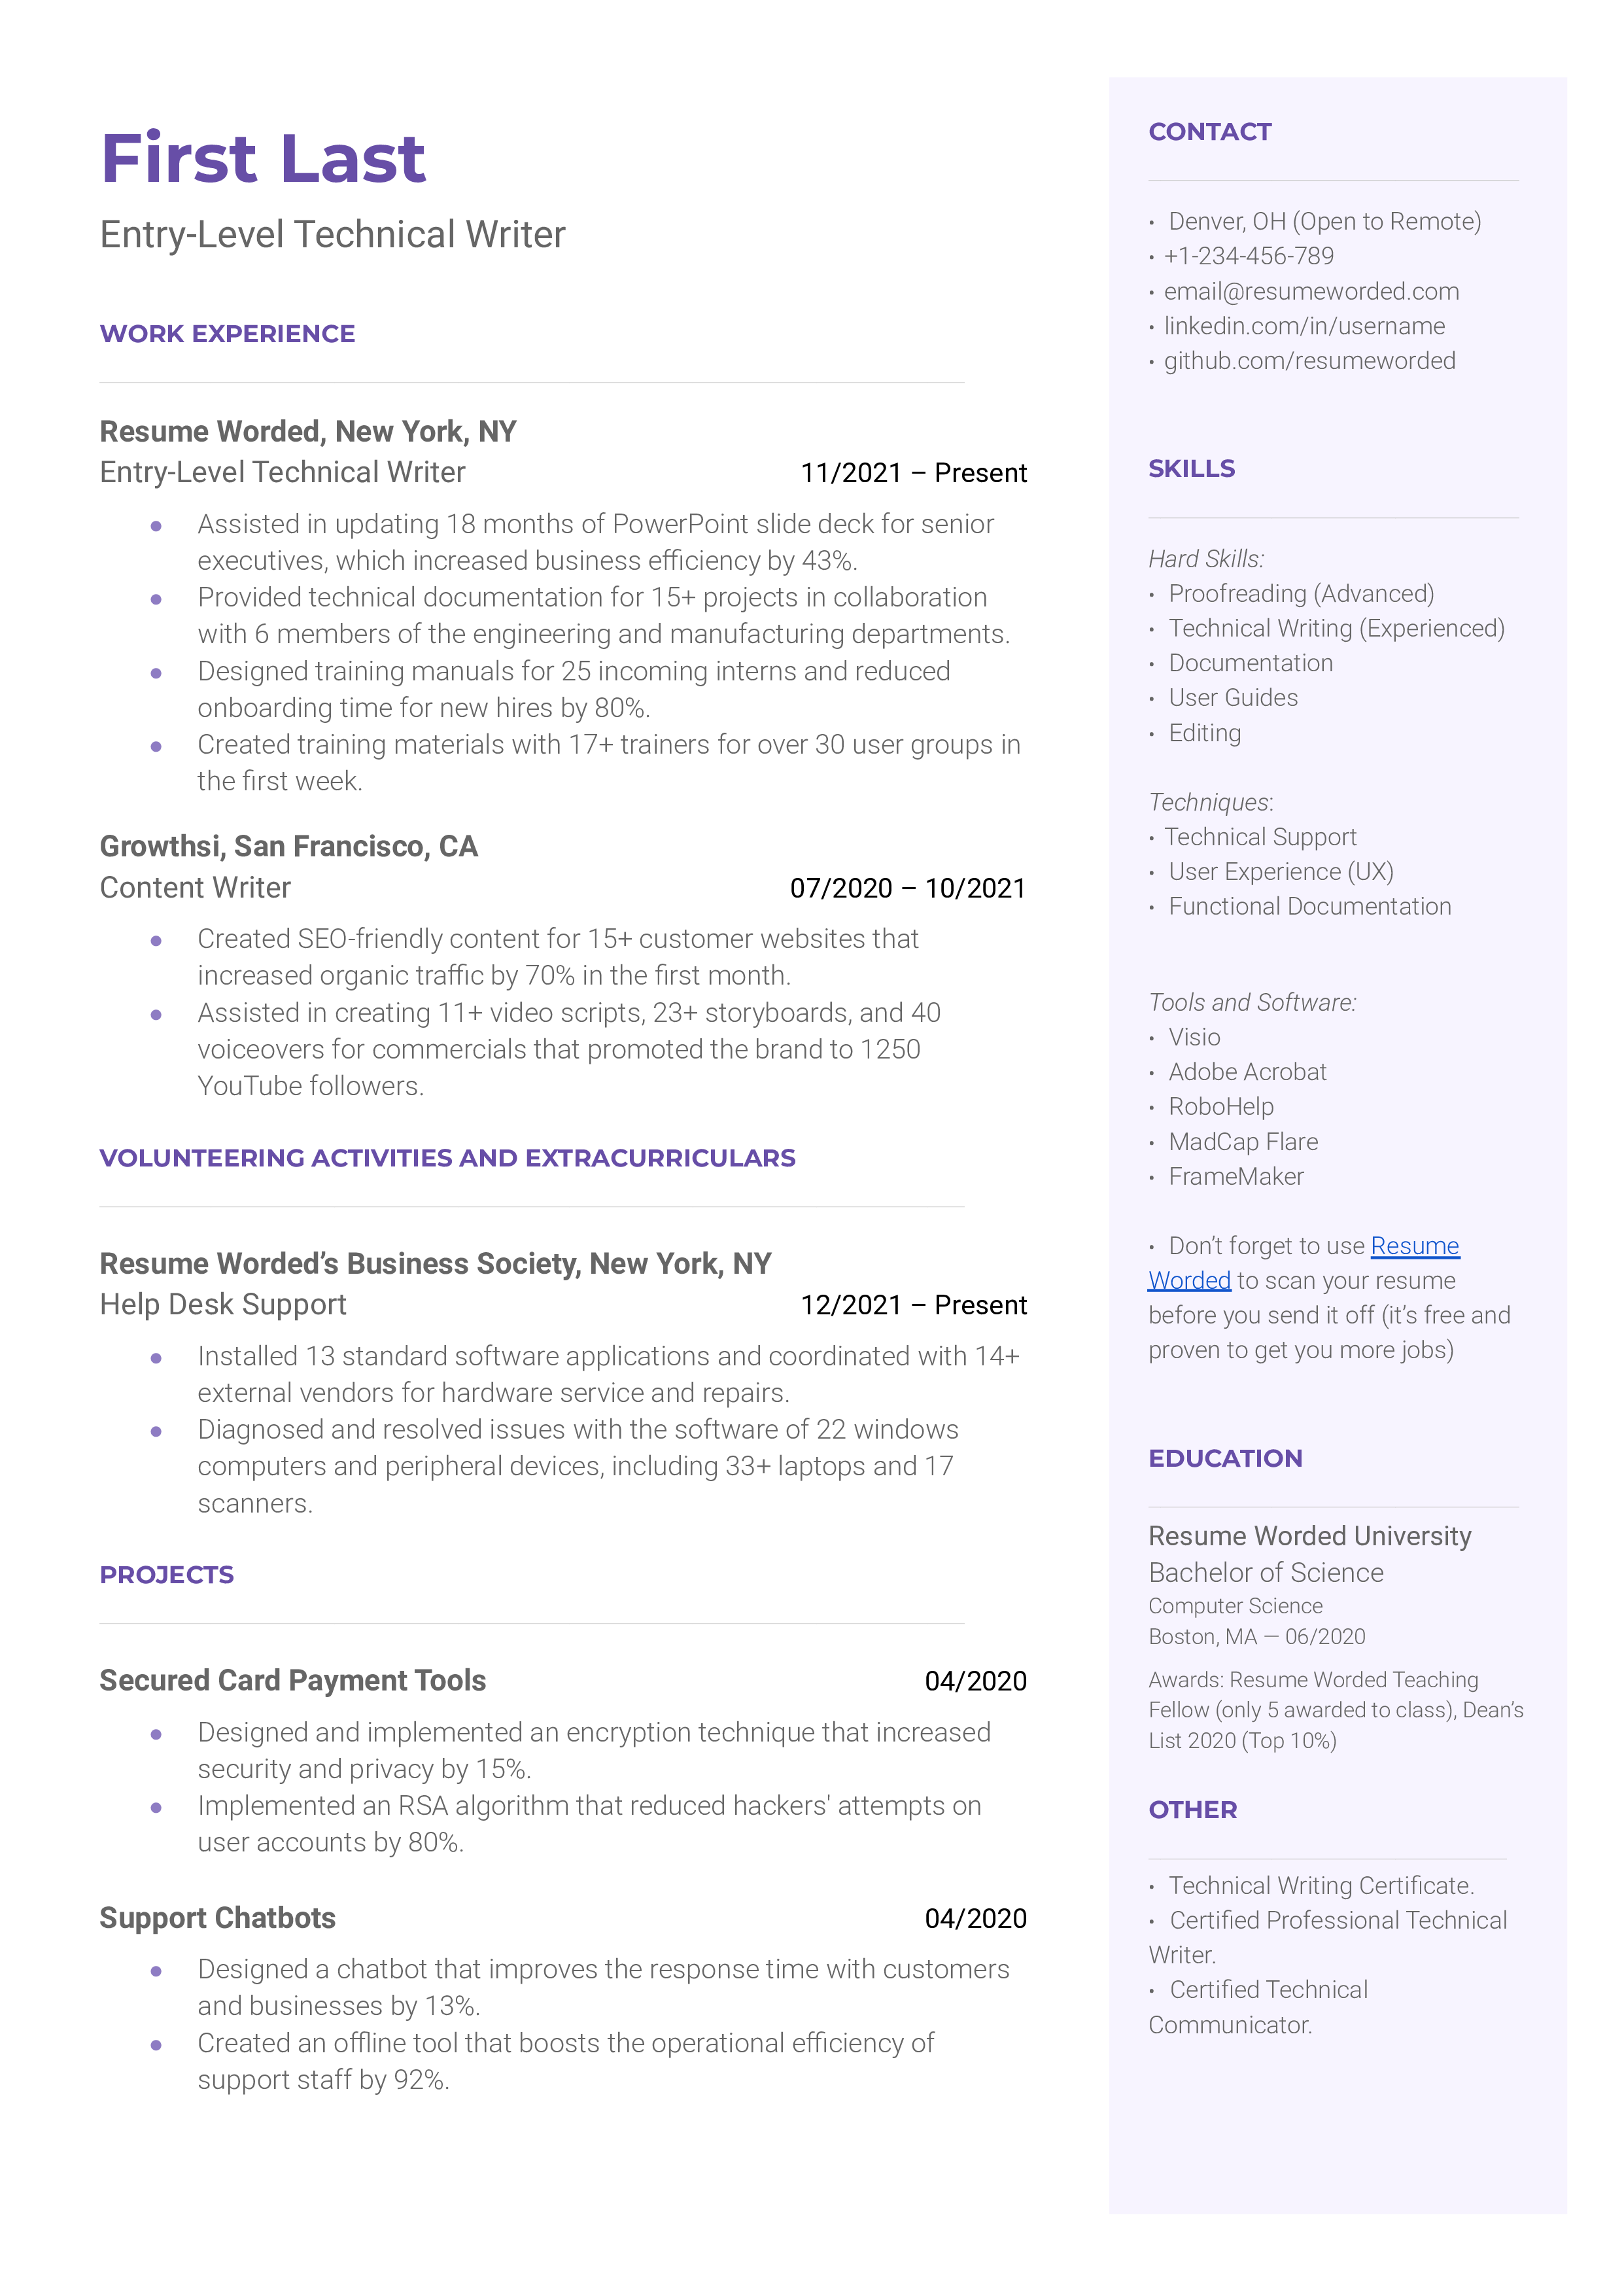 An entry-level technical writer resume sample that highlights the applicant’s certifications and experience.